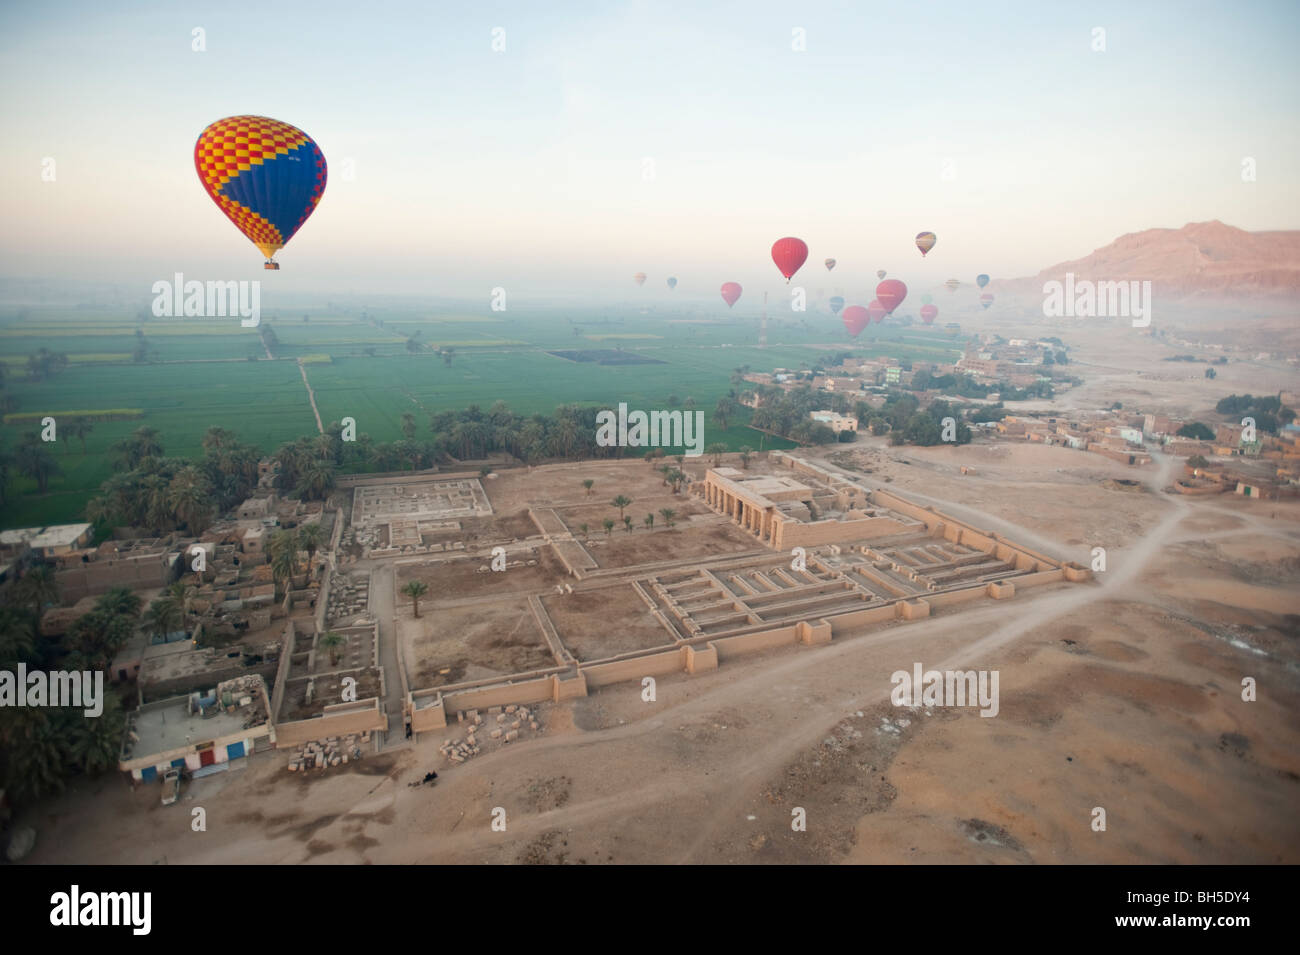 Hot air balloon ride near Valley of the Kings, Luxor, Egypt, Africa Stock Photo